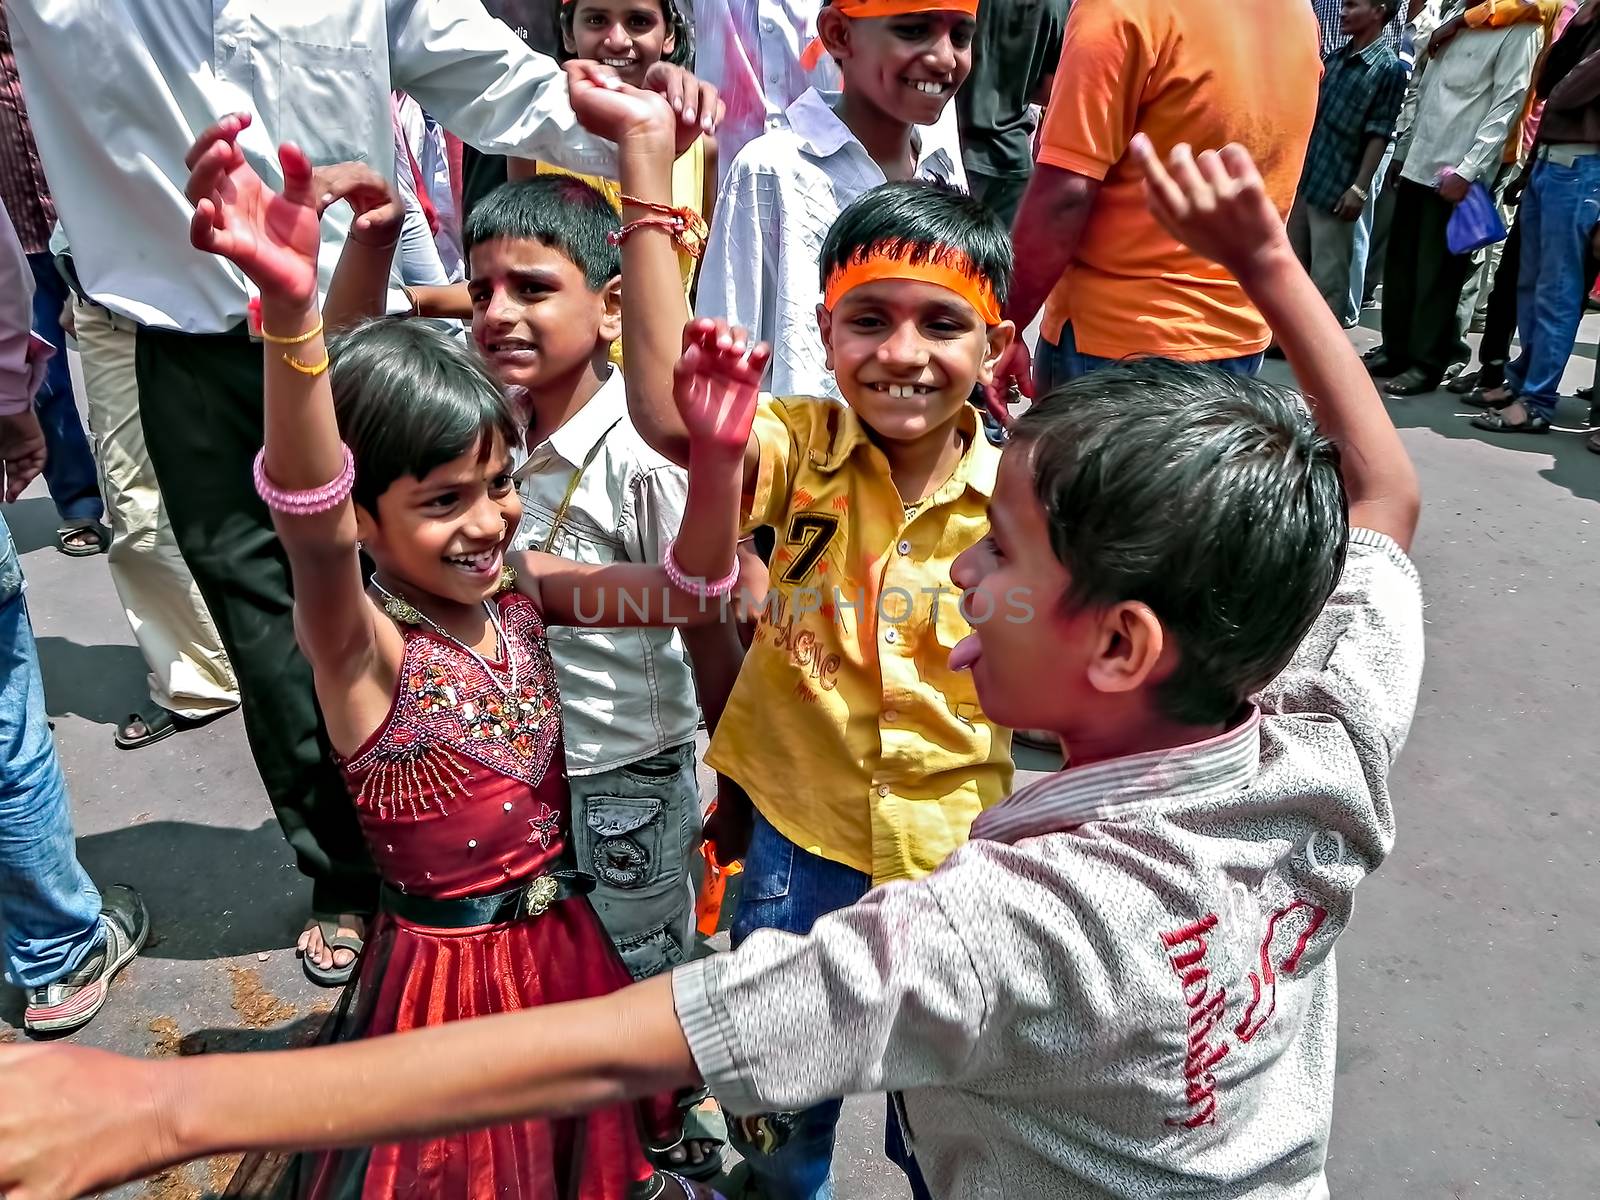 Children dancing in front of ganesh idol during festival process by lalam